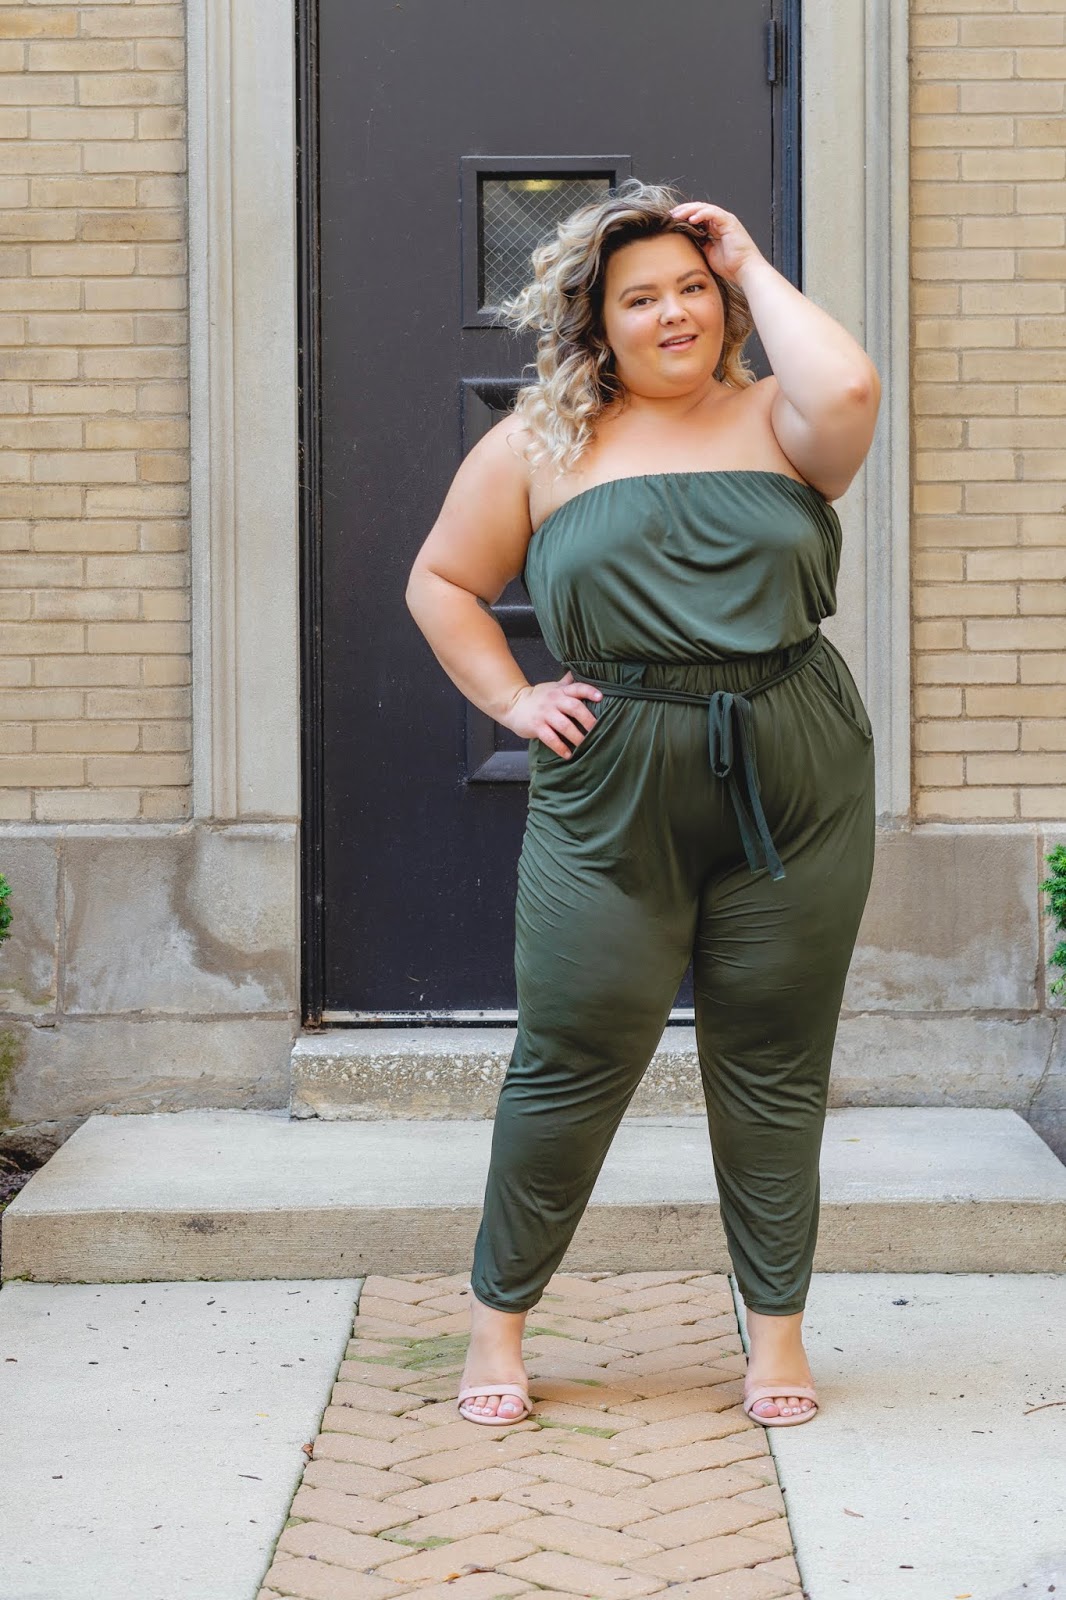 Chicago fashion blogger, Chicago plus size fashion blogger, natalie Craig, natalie in the city, plus size fashion, Chicago fashion, plus size fashion blogger, eff your beauty standards, fatshion, skorch magazine, Chicago model, plus size model, plus size petite, affordable plus size clothing, embrace your curves, plus model magazine,  petite plus size, fashion nova, fashion nova curve, jumpsuit, plus size jumpsuit, flattering jumpsuits, plus size trench duster coat